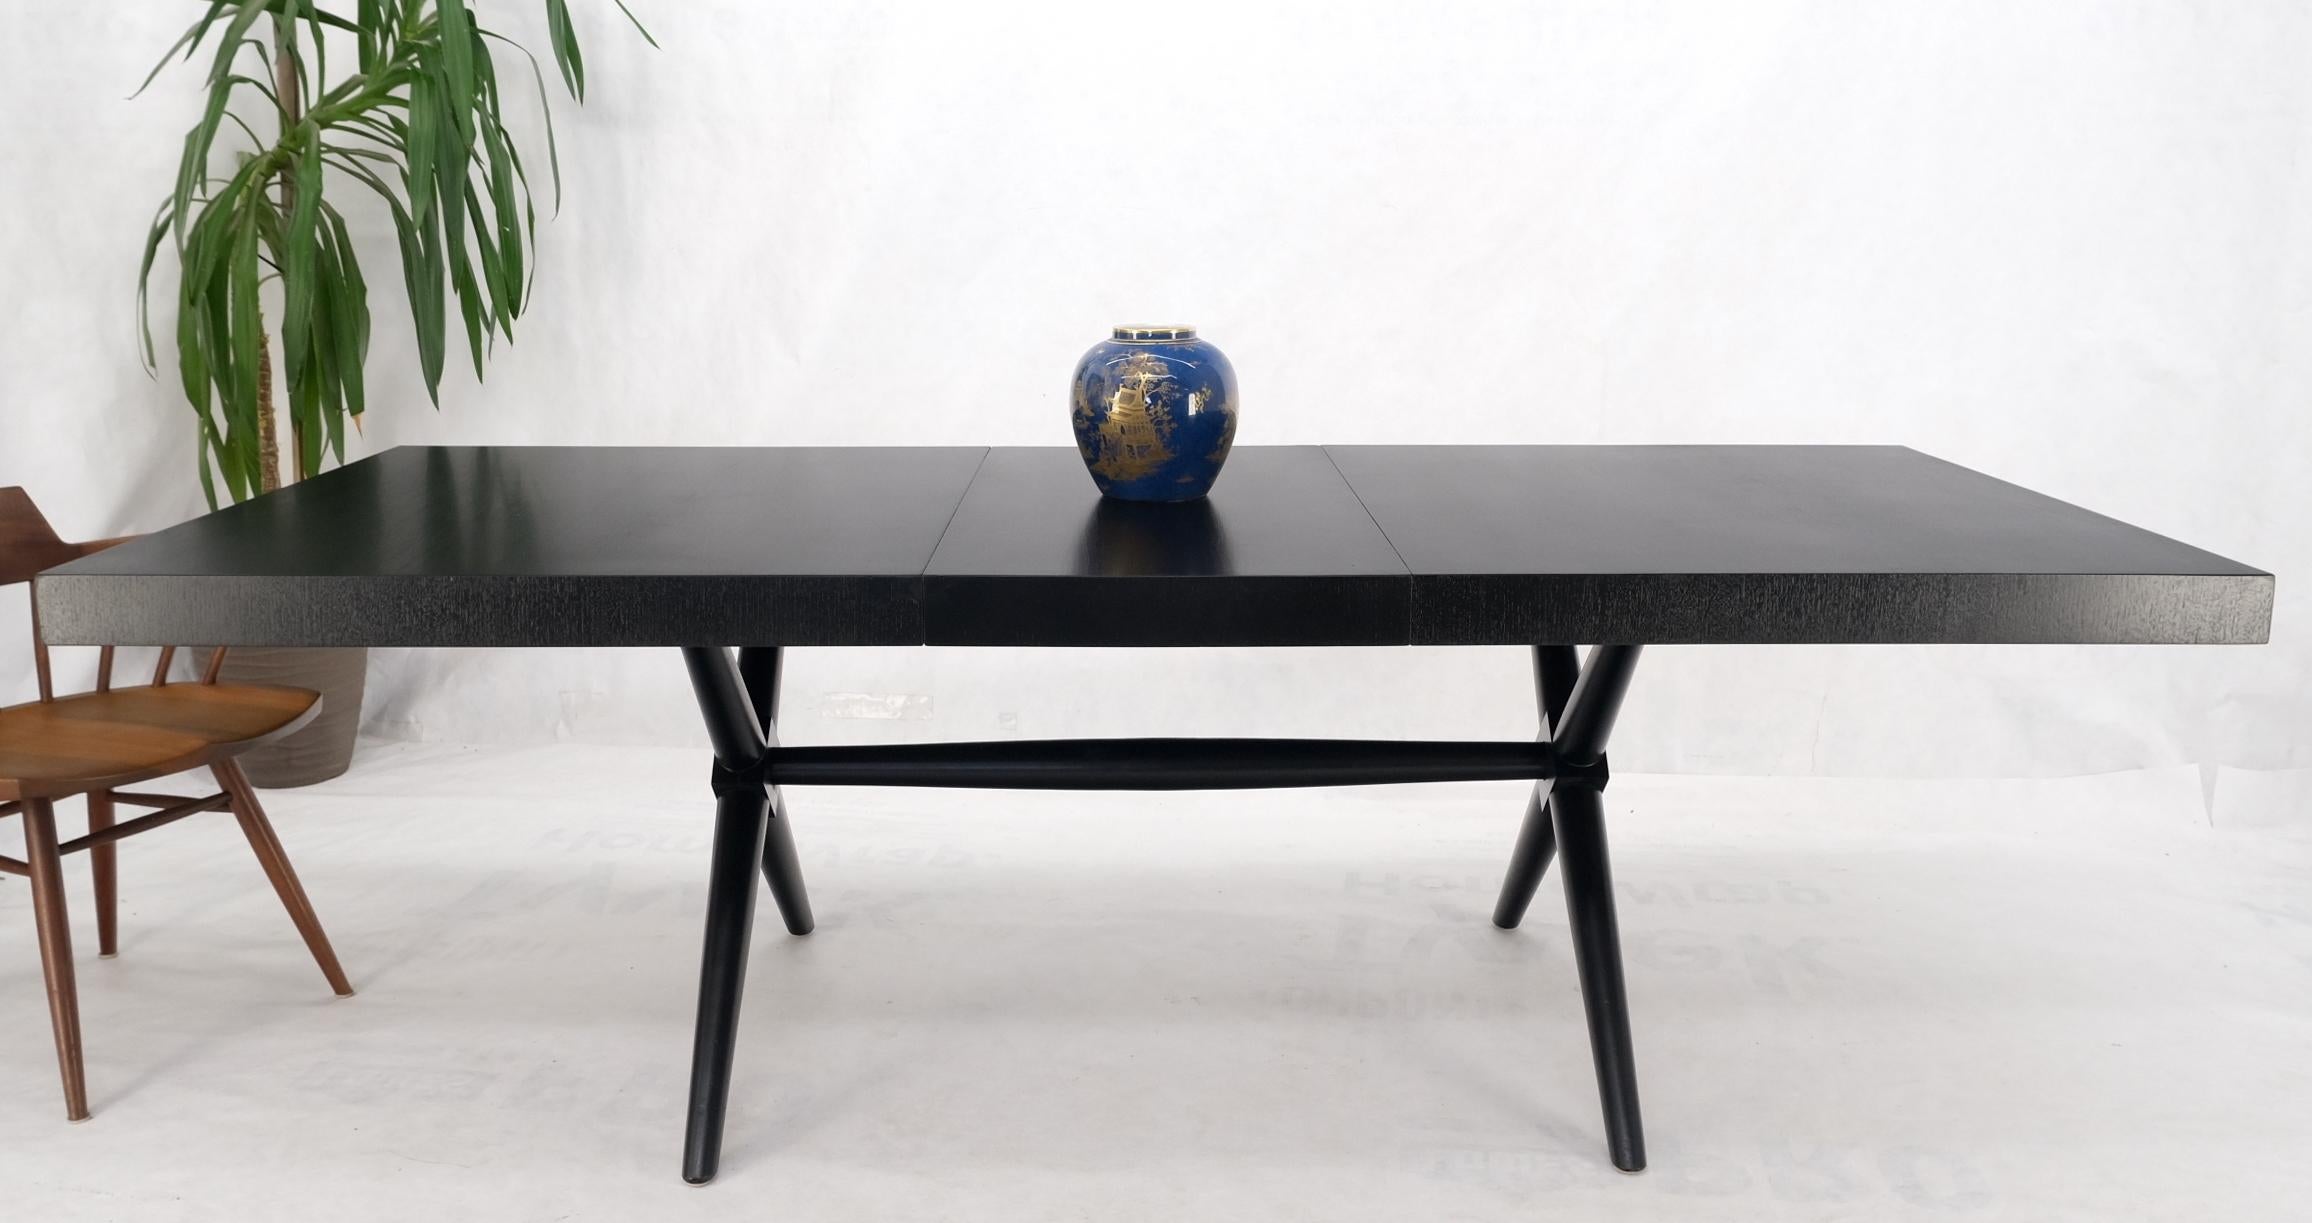 Black Lacquer One Leaf X Base Gibbings Trestle Dining Table by Widdicomb Mint For Sale 10